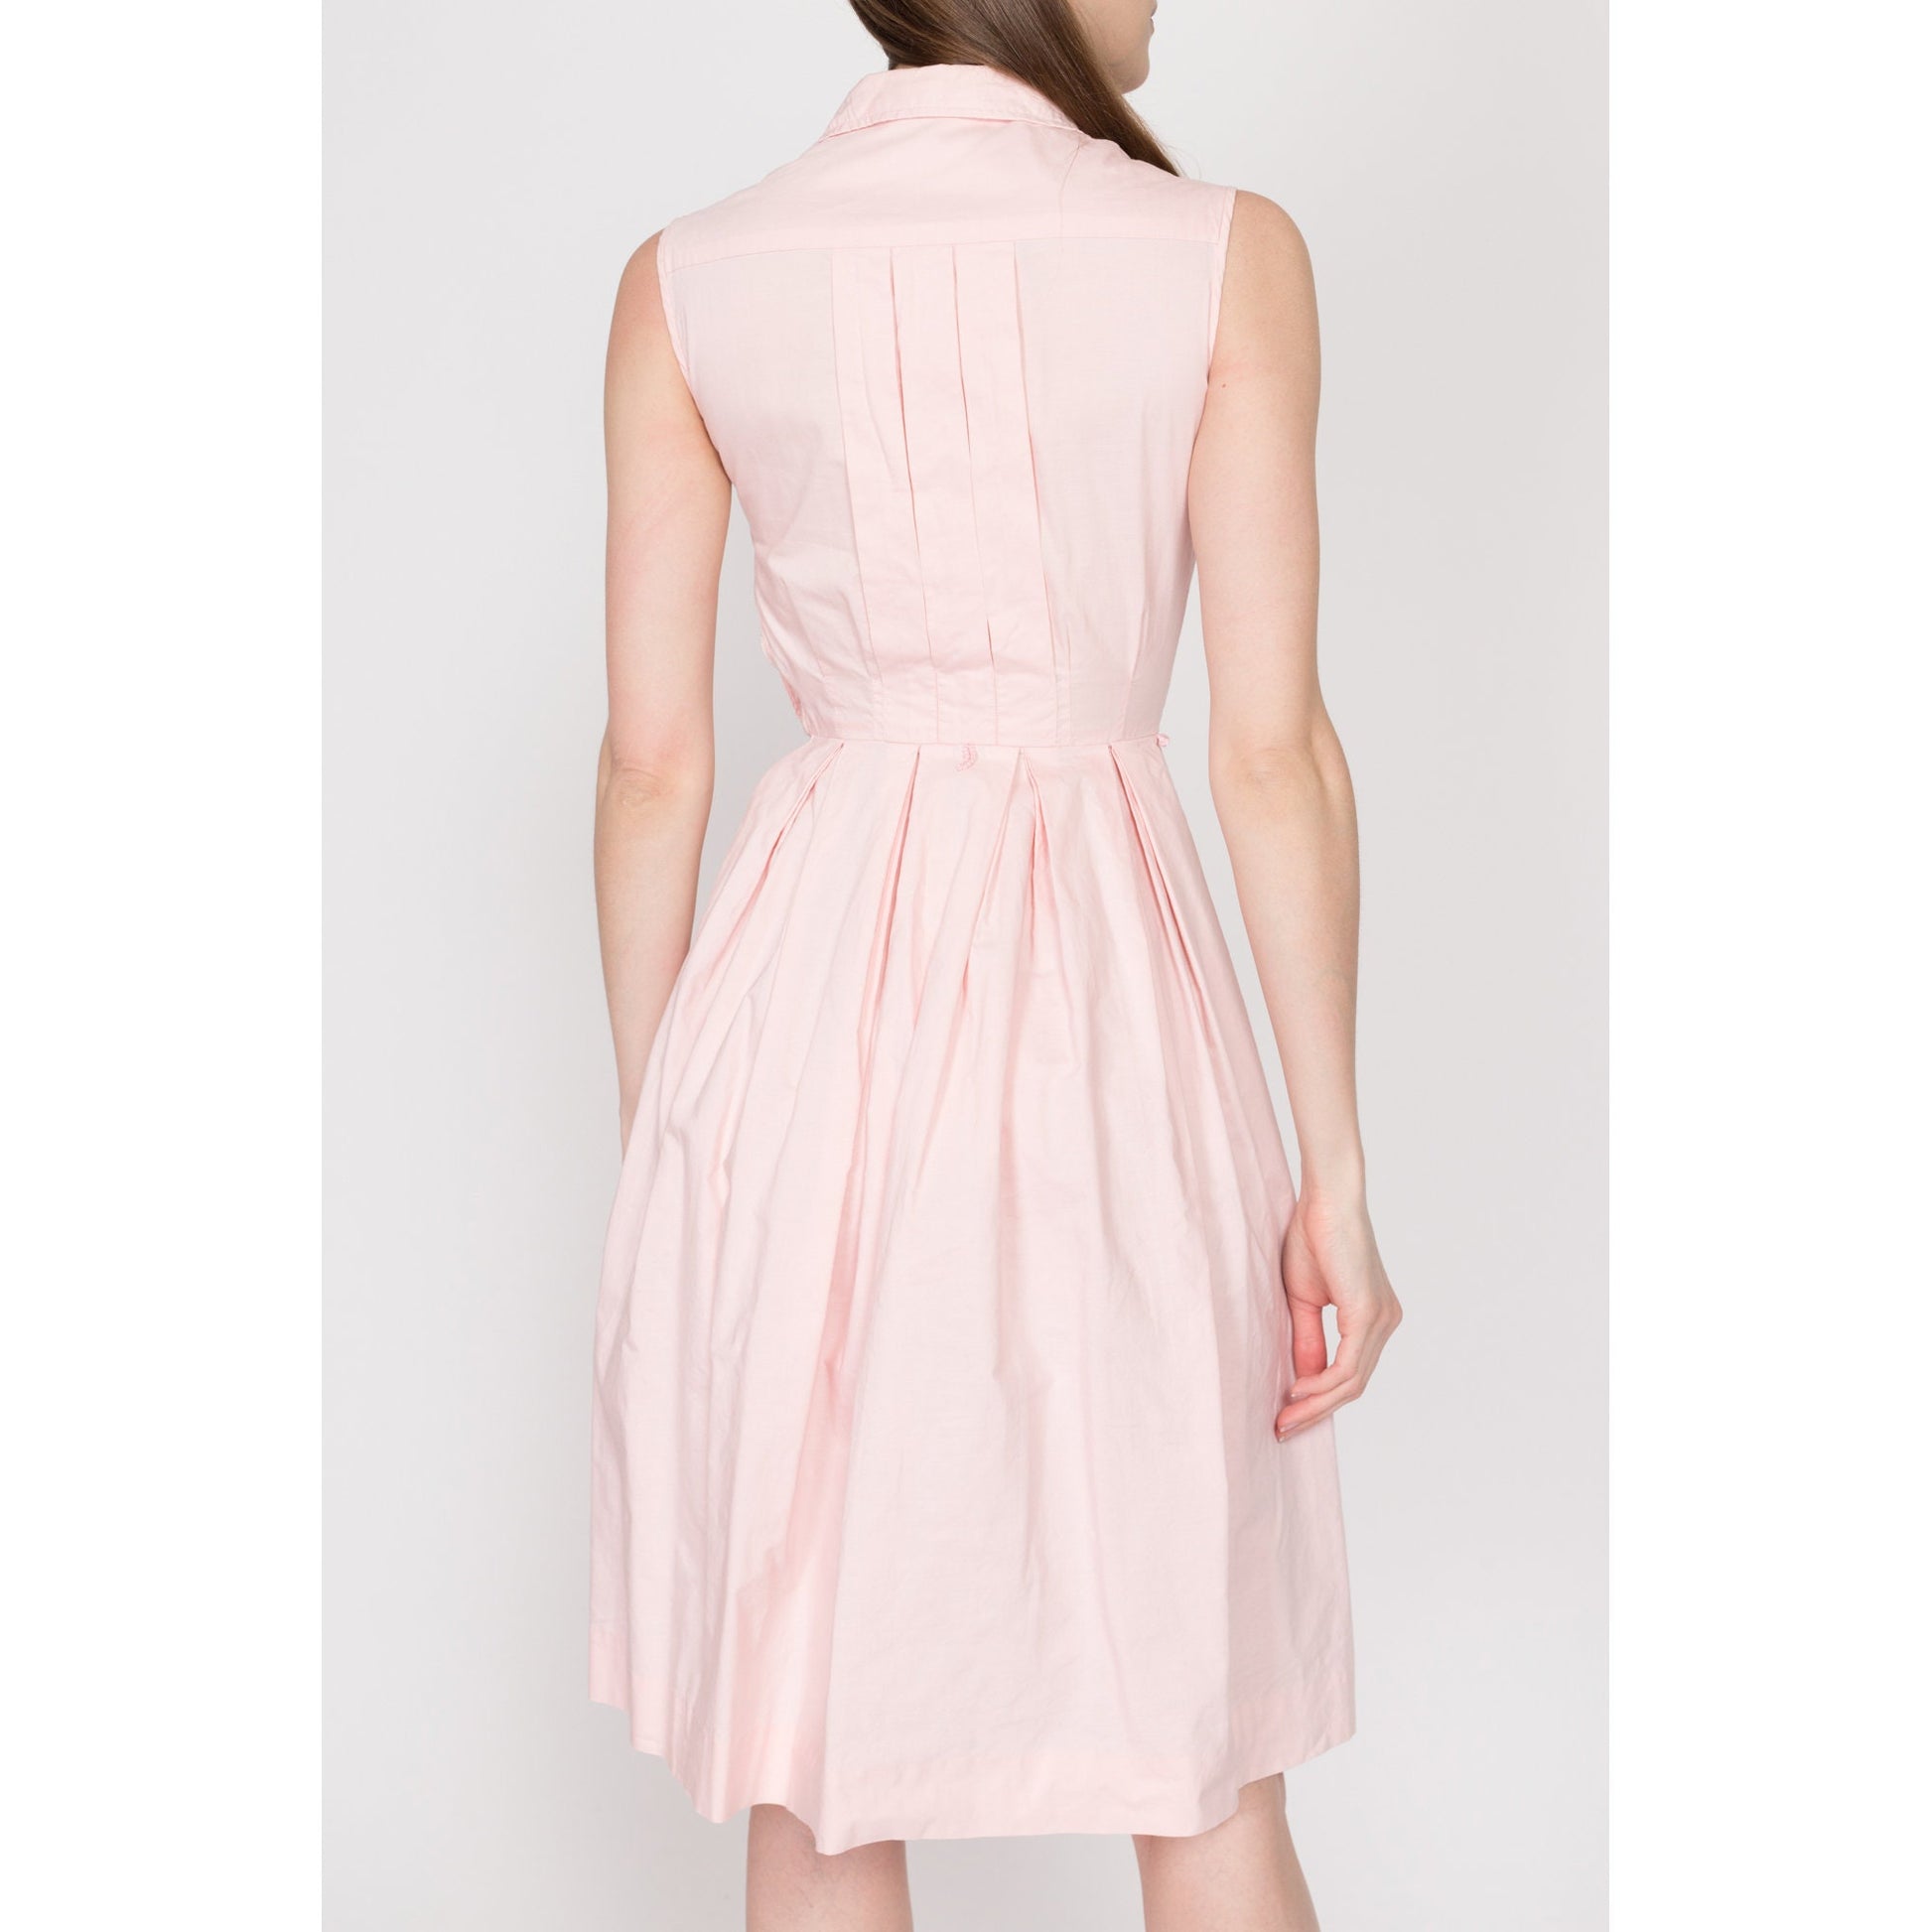 Petite XXS-XS 1950s Bobbie Brooks Pink Fit & Flare Day Dress | Vintage 50s Sleeveless Collared Pleated Housewife Mini Sundress